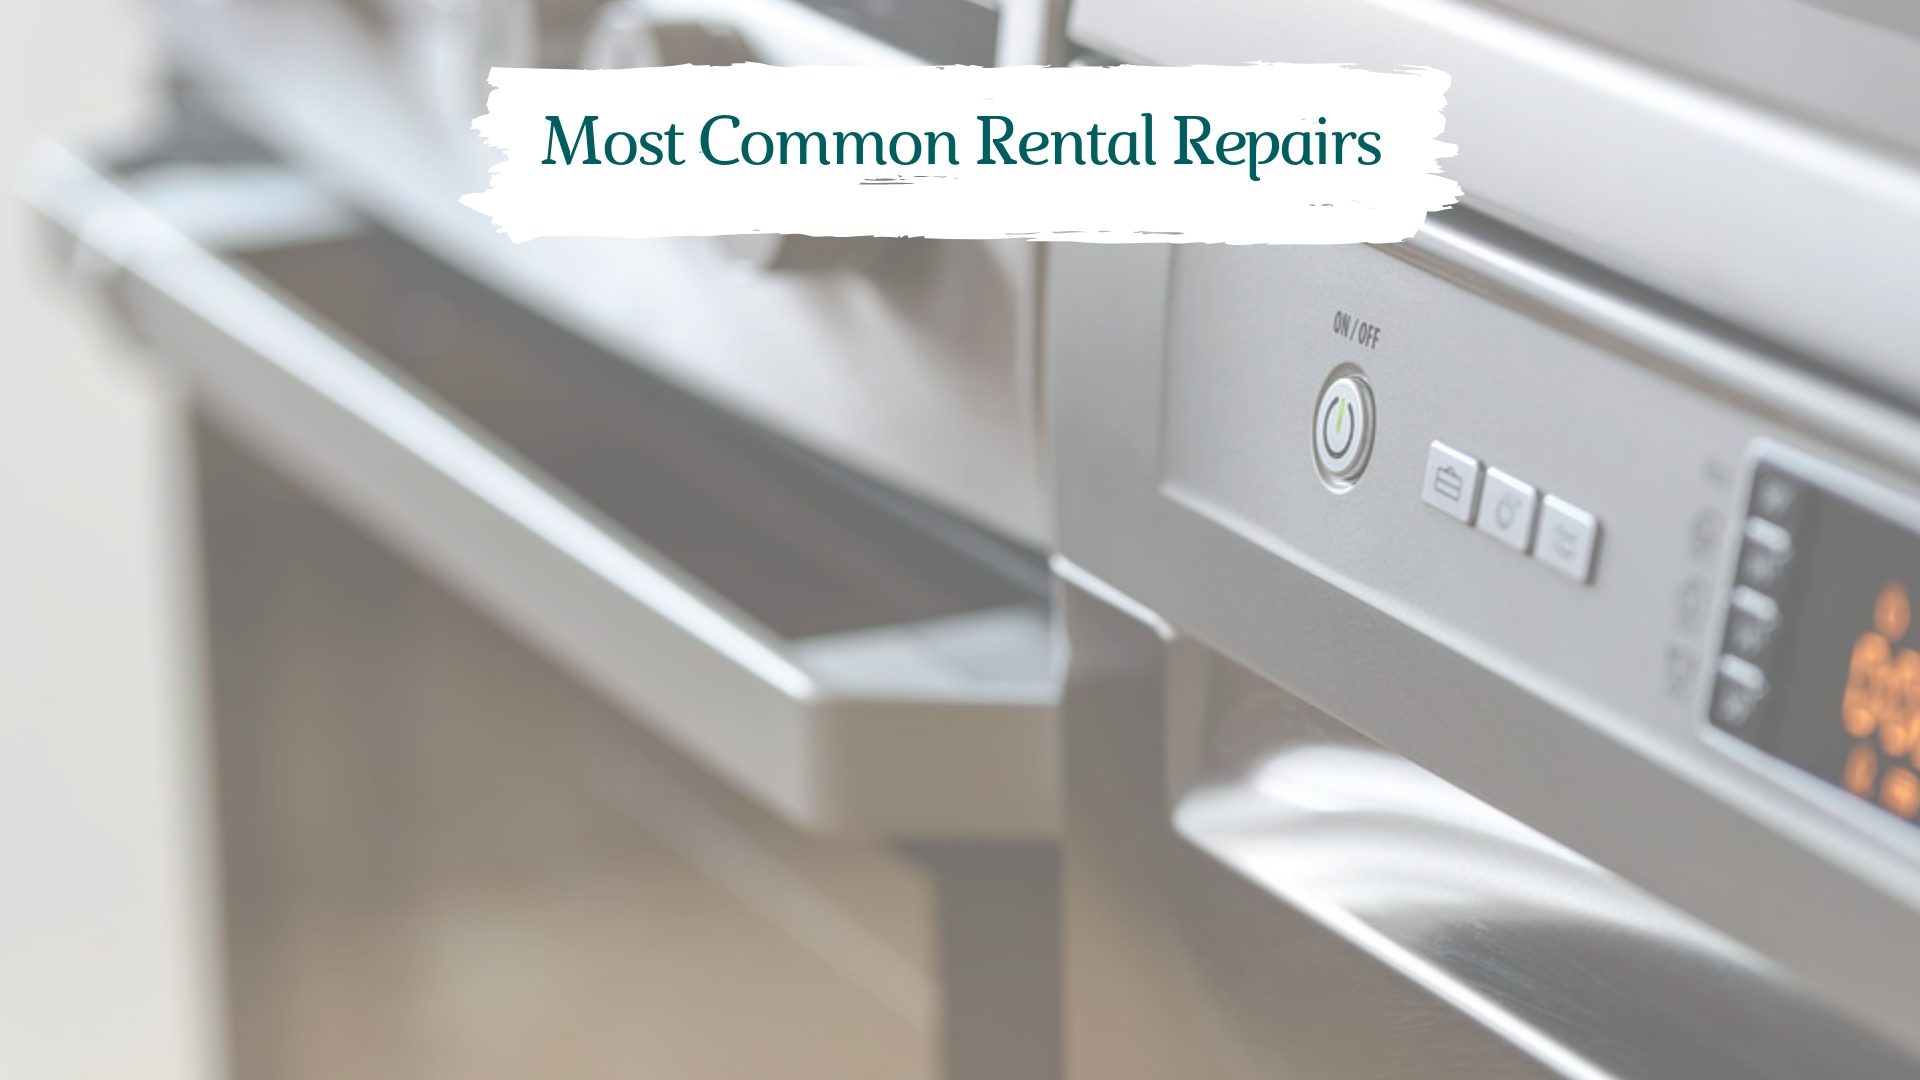 What Are The Most Common San Jose Rental Repairs?